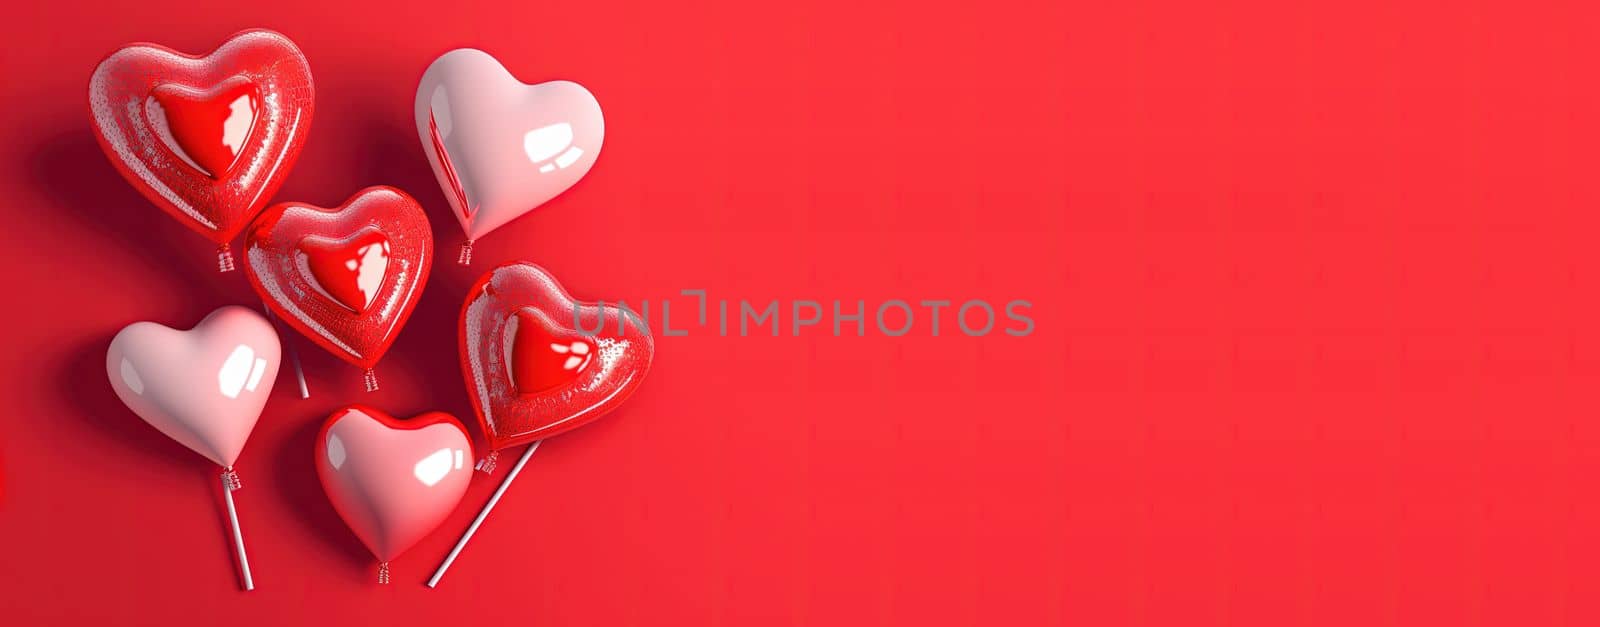 Valentine's Day illustration with a red 3D heart on a banner background by templator